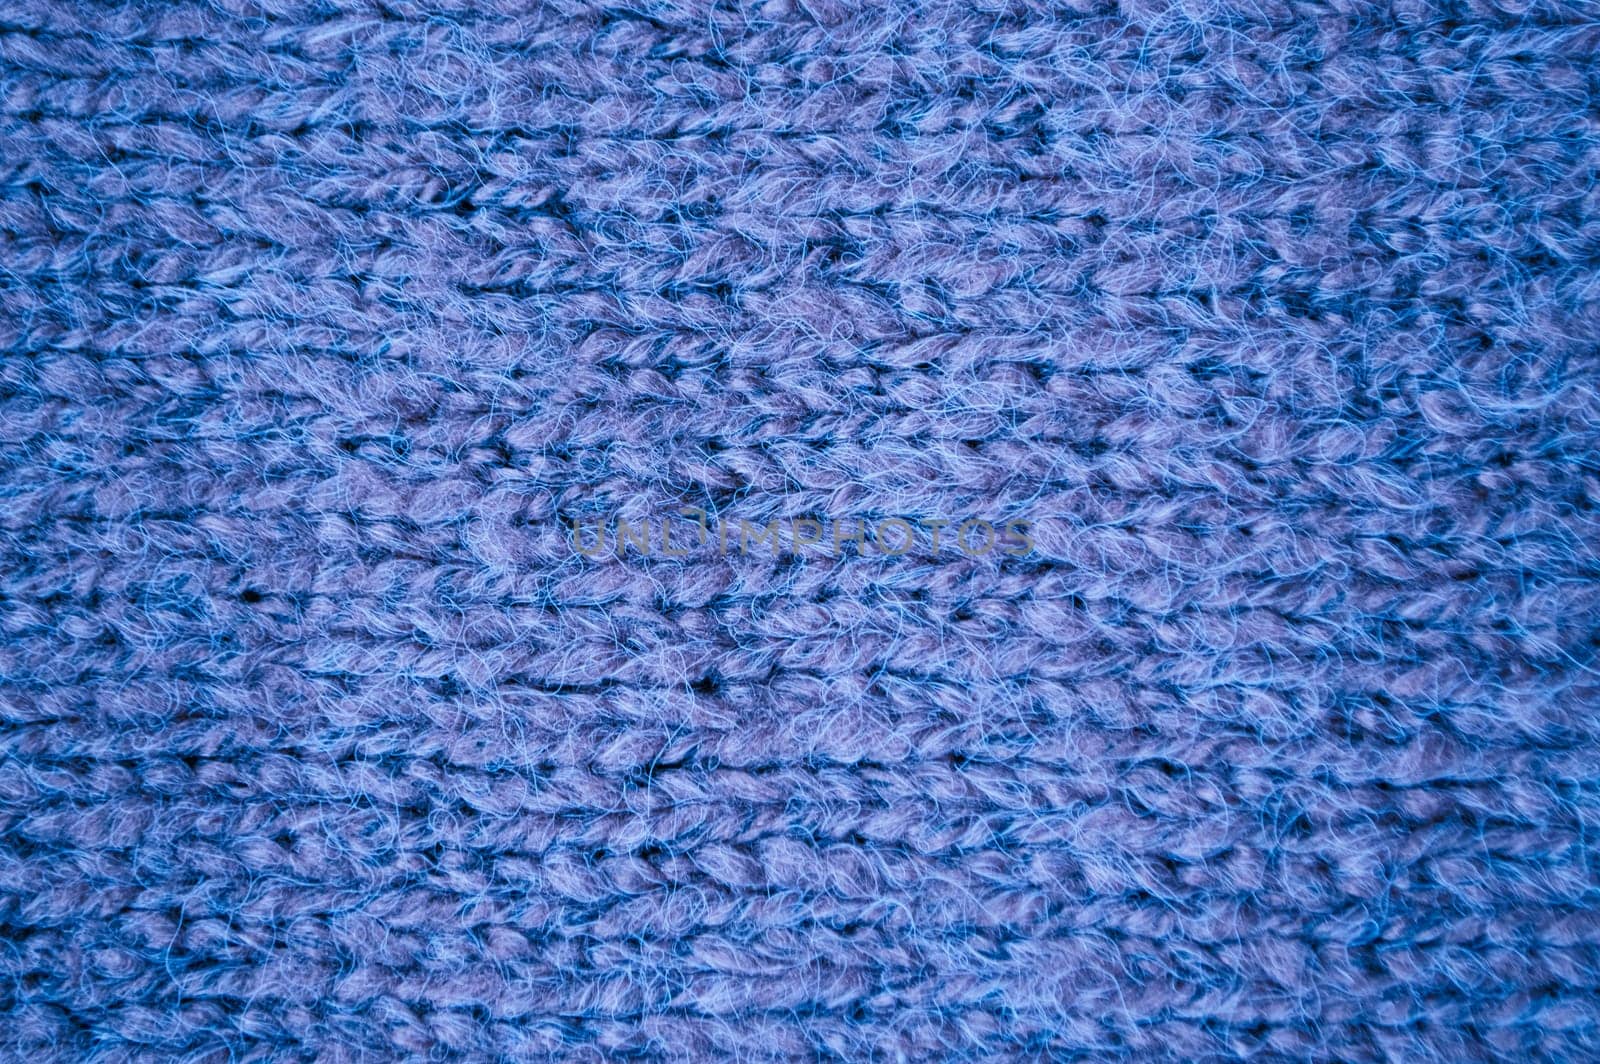 Soft Knitted Sweater. Abstract Wool Design. Handmade Christmas Background. Knitted Sweater. Blue Structure Thread. Nordic Xmas Cloth. Closeup Plaid Wallpaper. Weave Knitted Blanket.